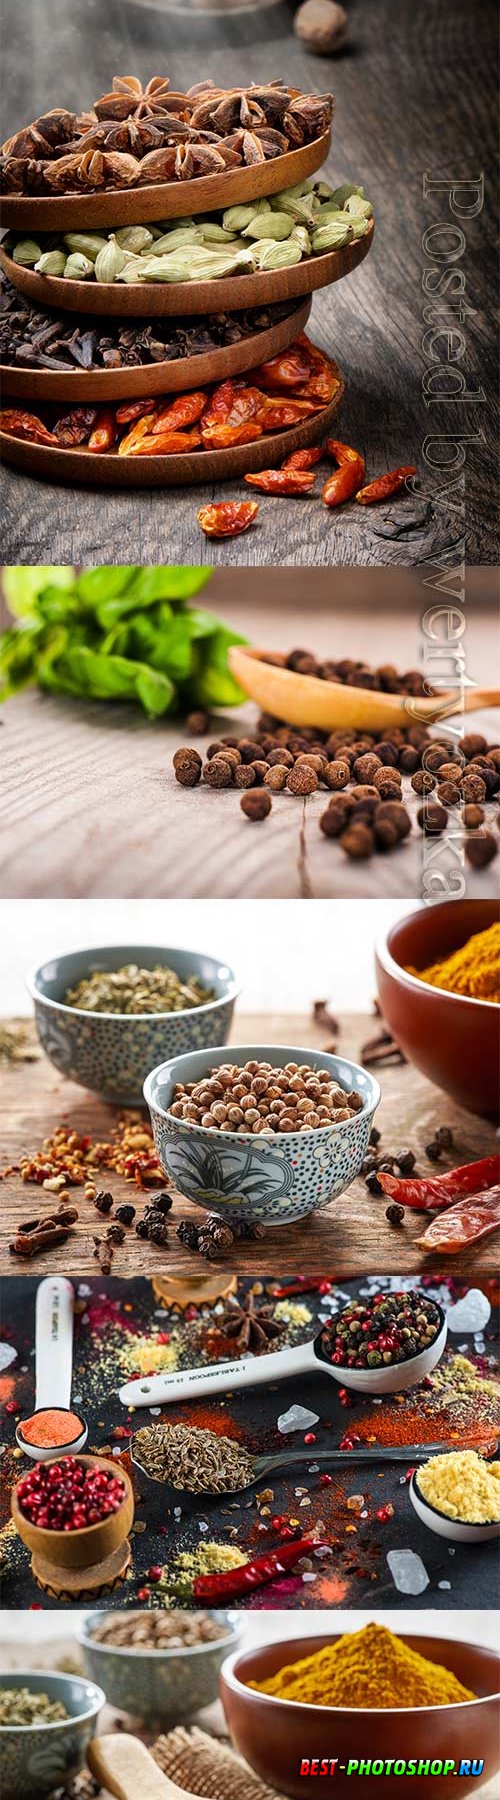 Various spices in various dishes stock photo